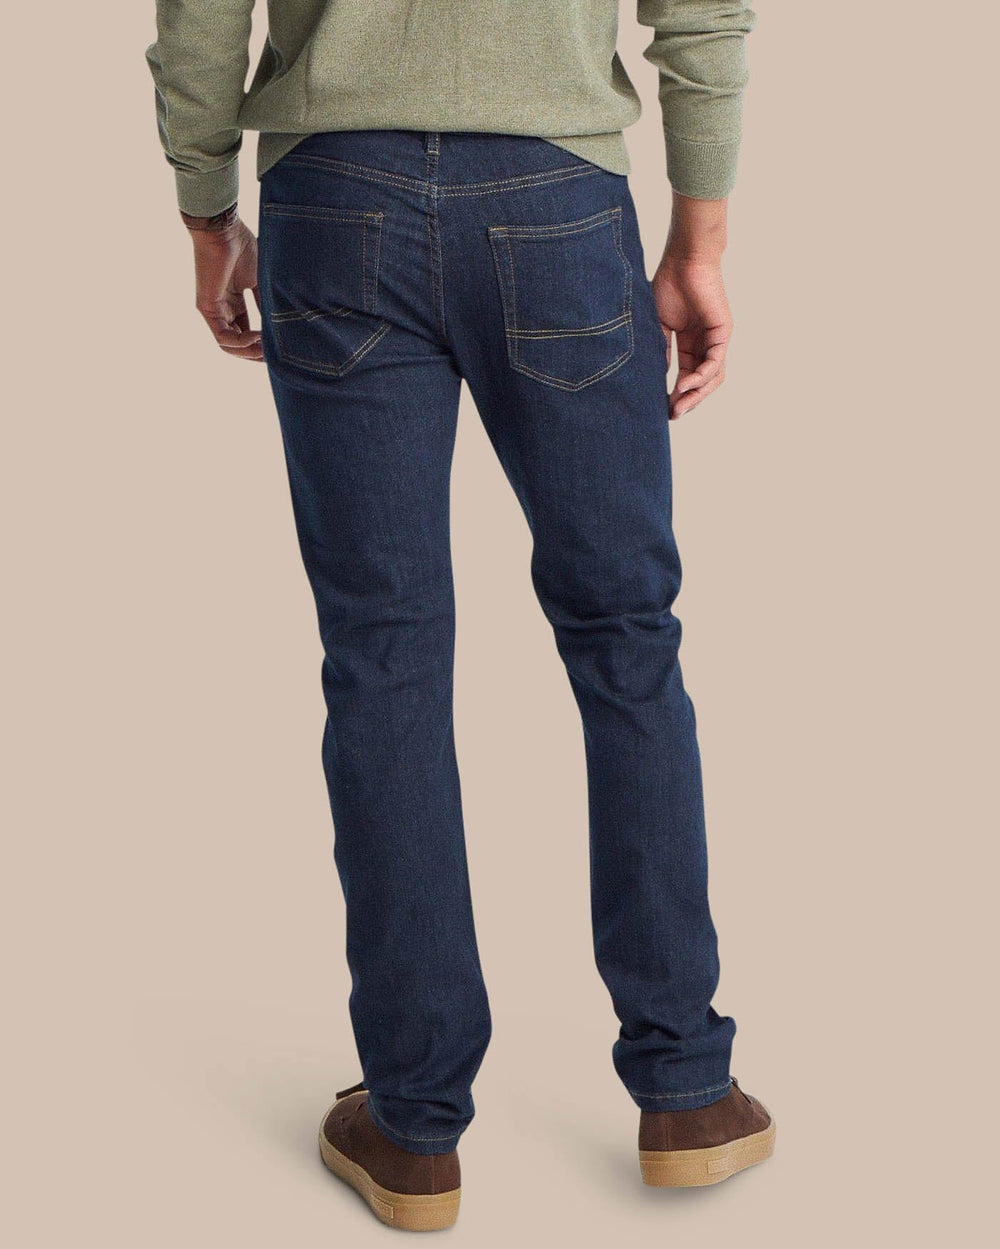 The back view of the Men's Blue Denim Charleston Denim Jeans by Southern Tide - Rinse